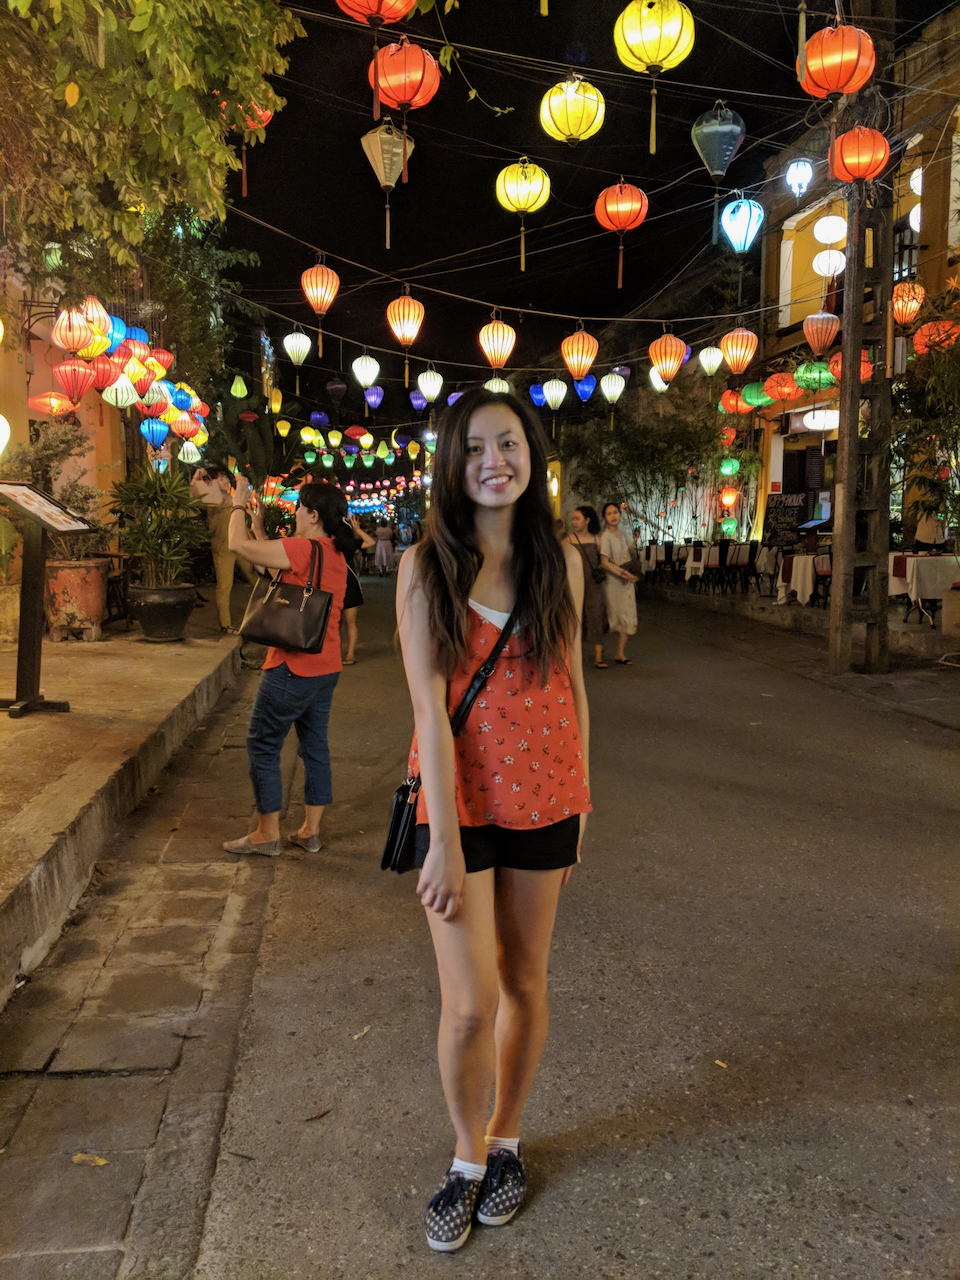 The streets of Hoi An